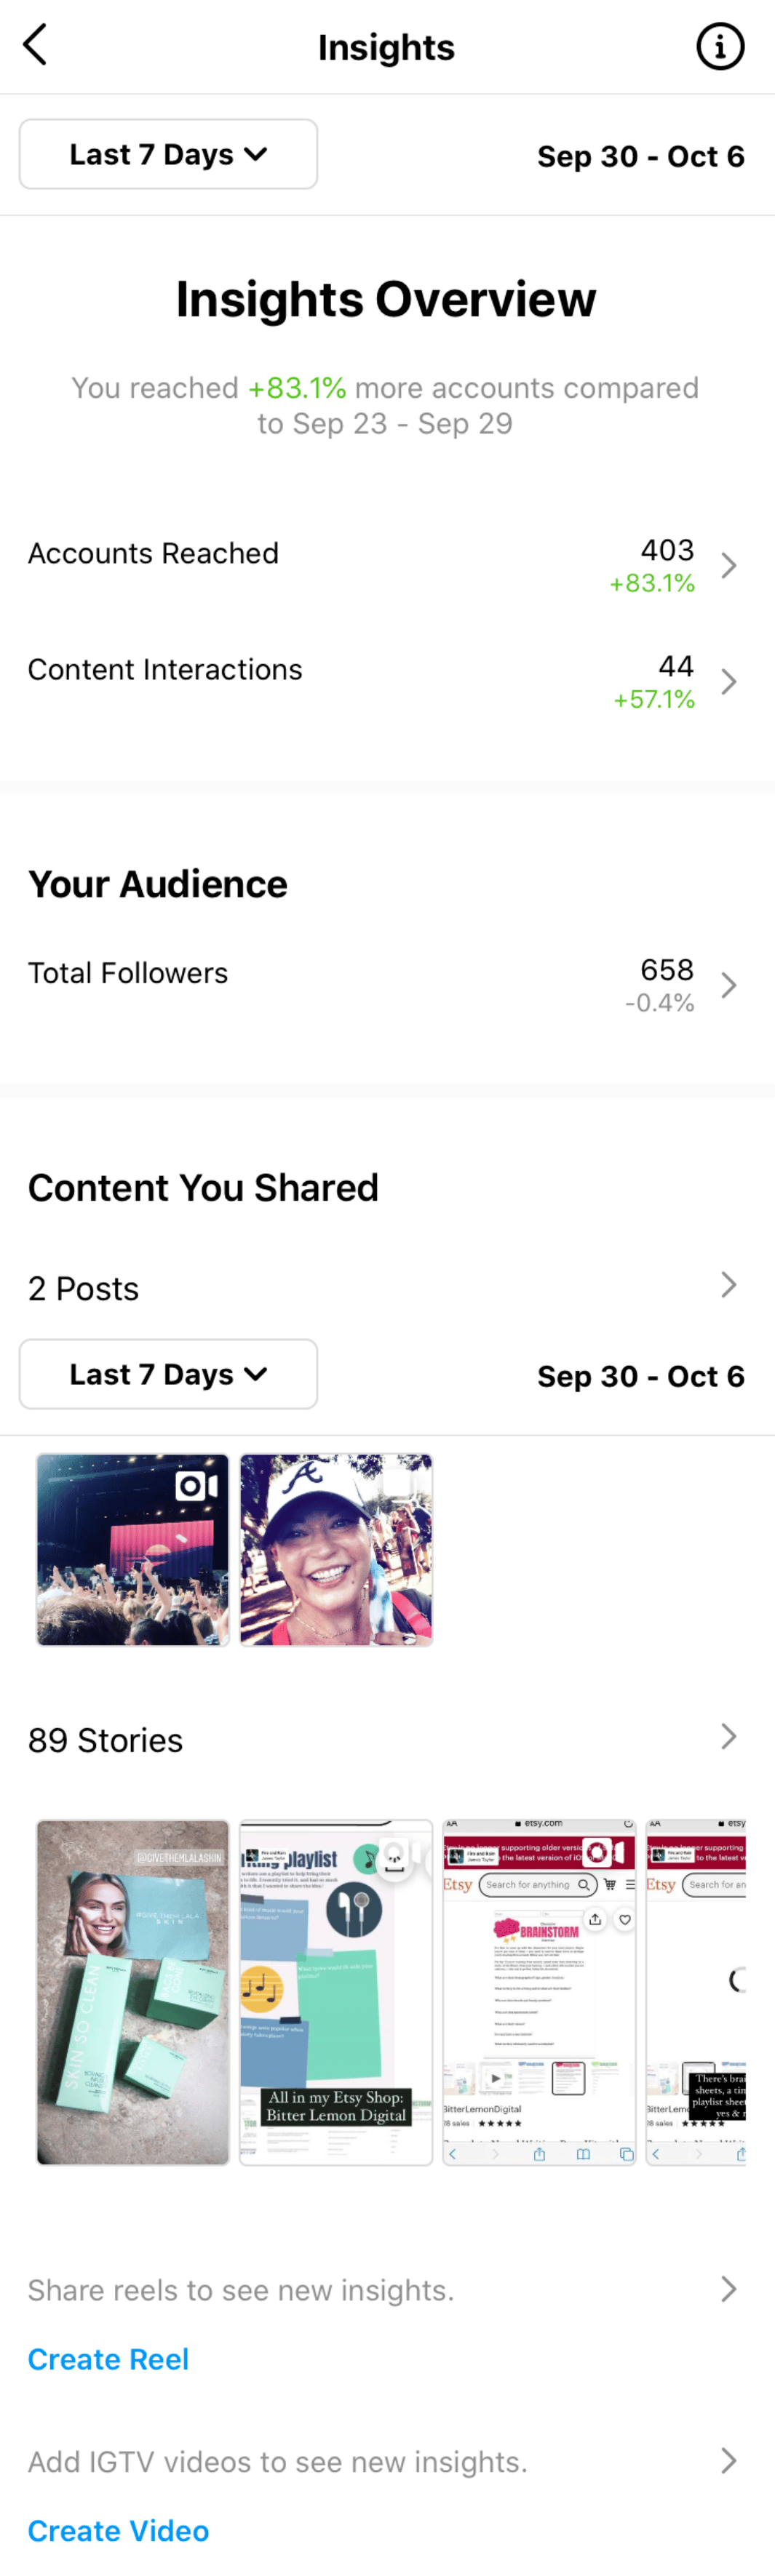 Instagram insights example